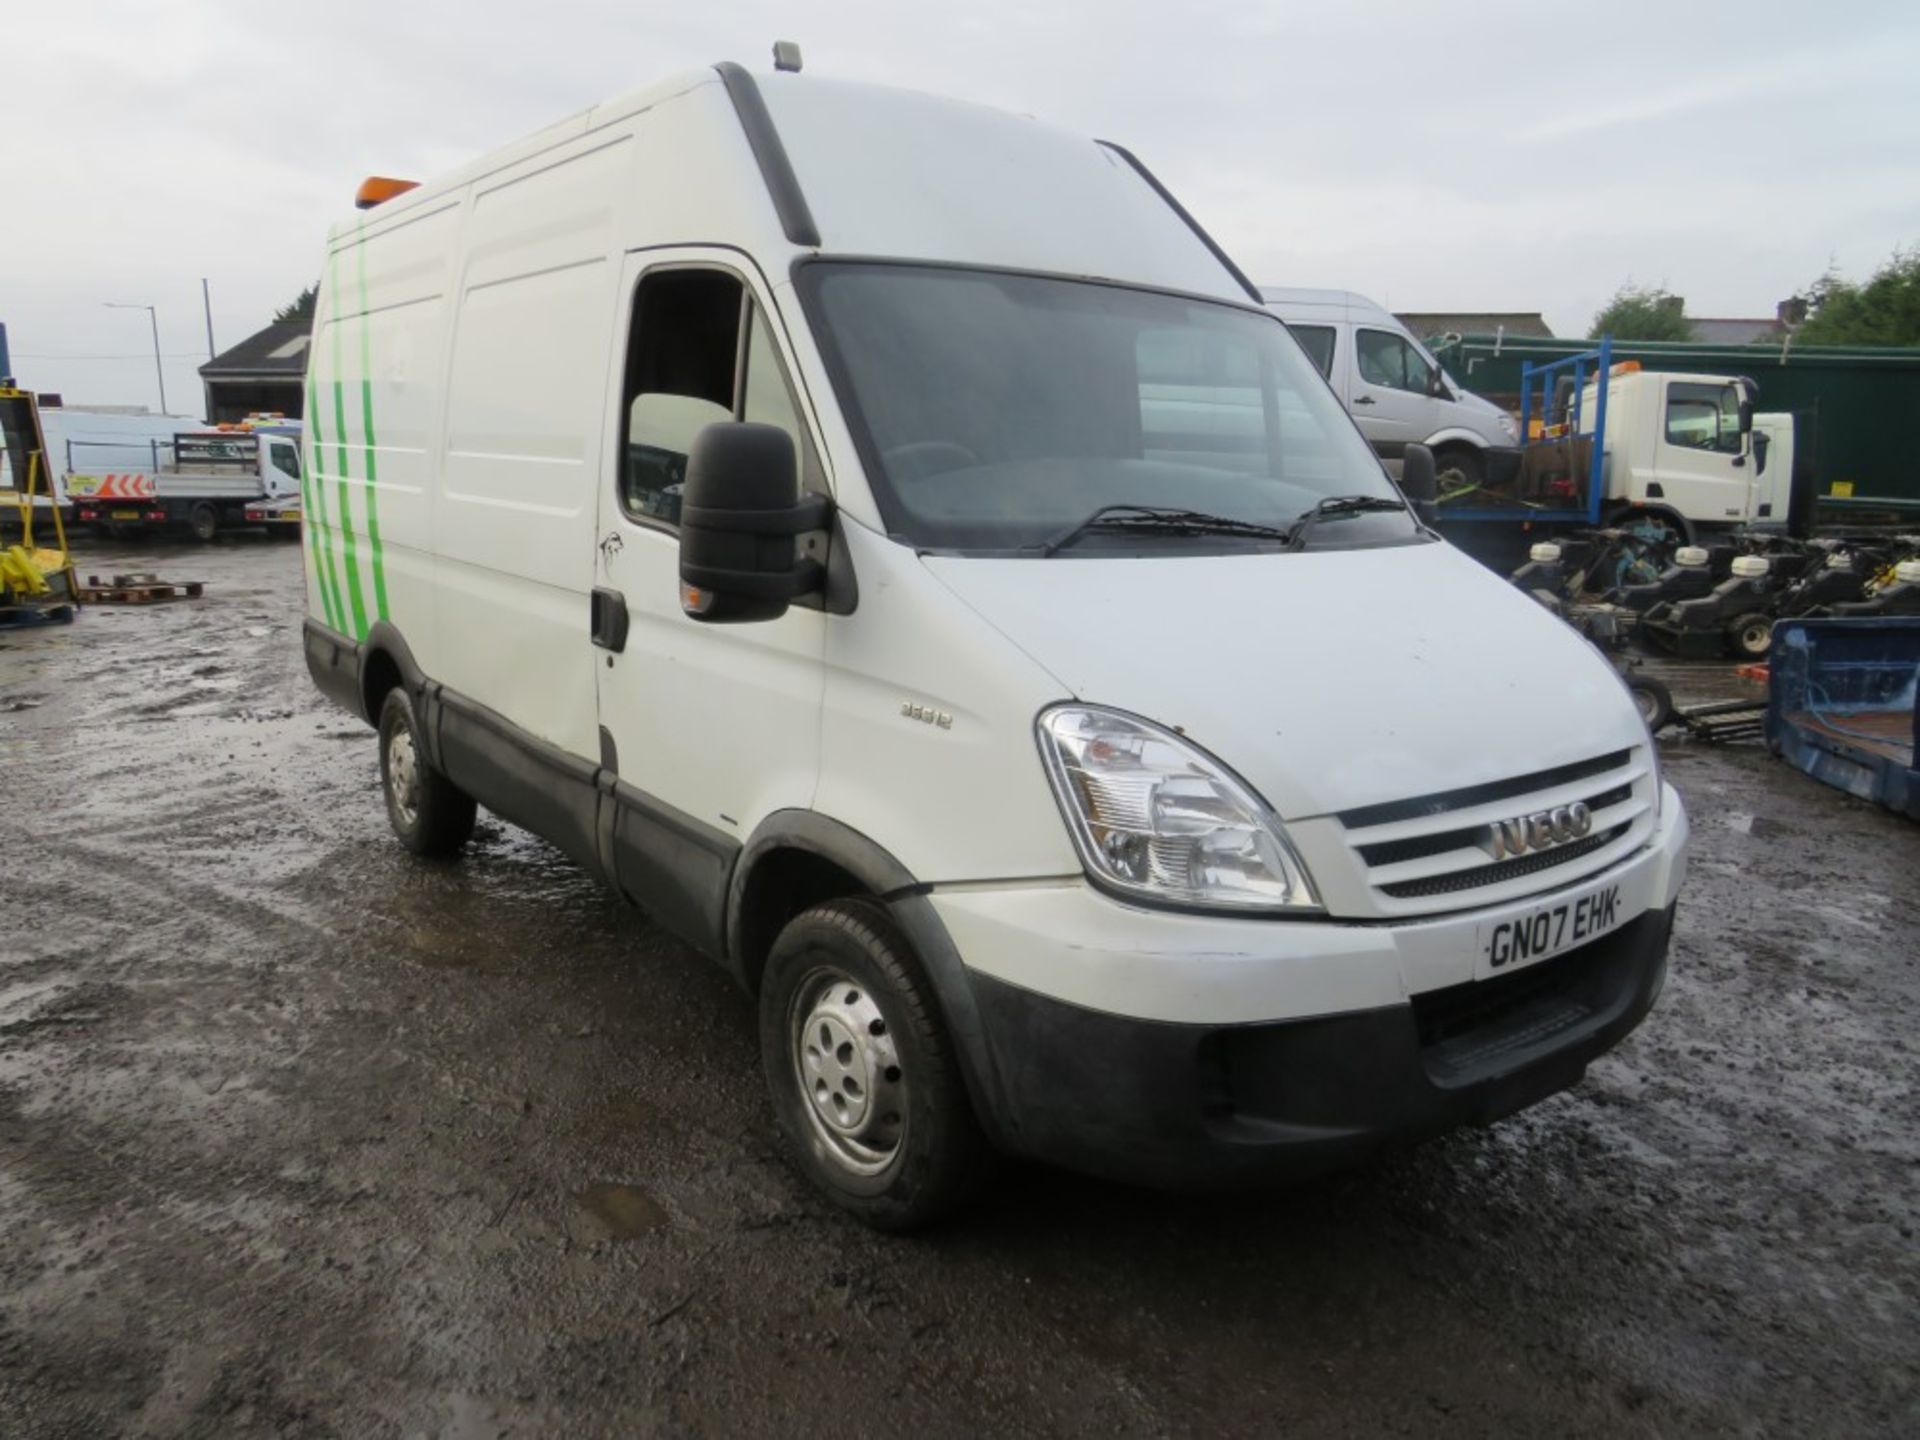 07 reg IVECO DAILY 35S12 MWB, 1ST REG 04/07, TEST 12/20, 234999M WARRANTED, V5 HERE, 1 FORMER KEEPER